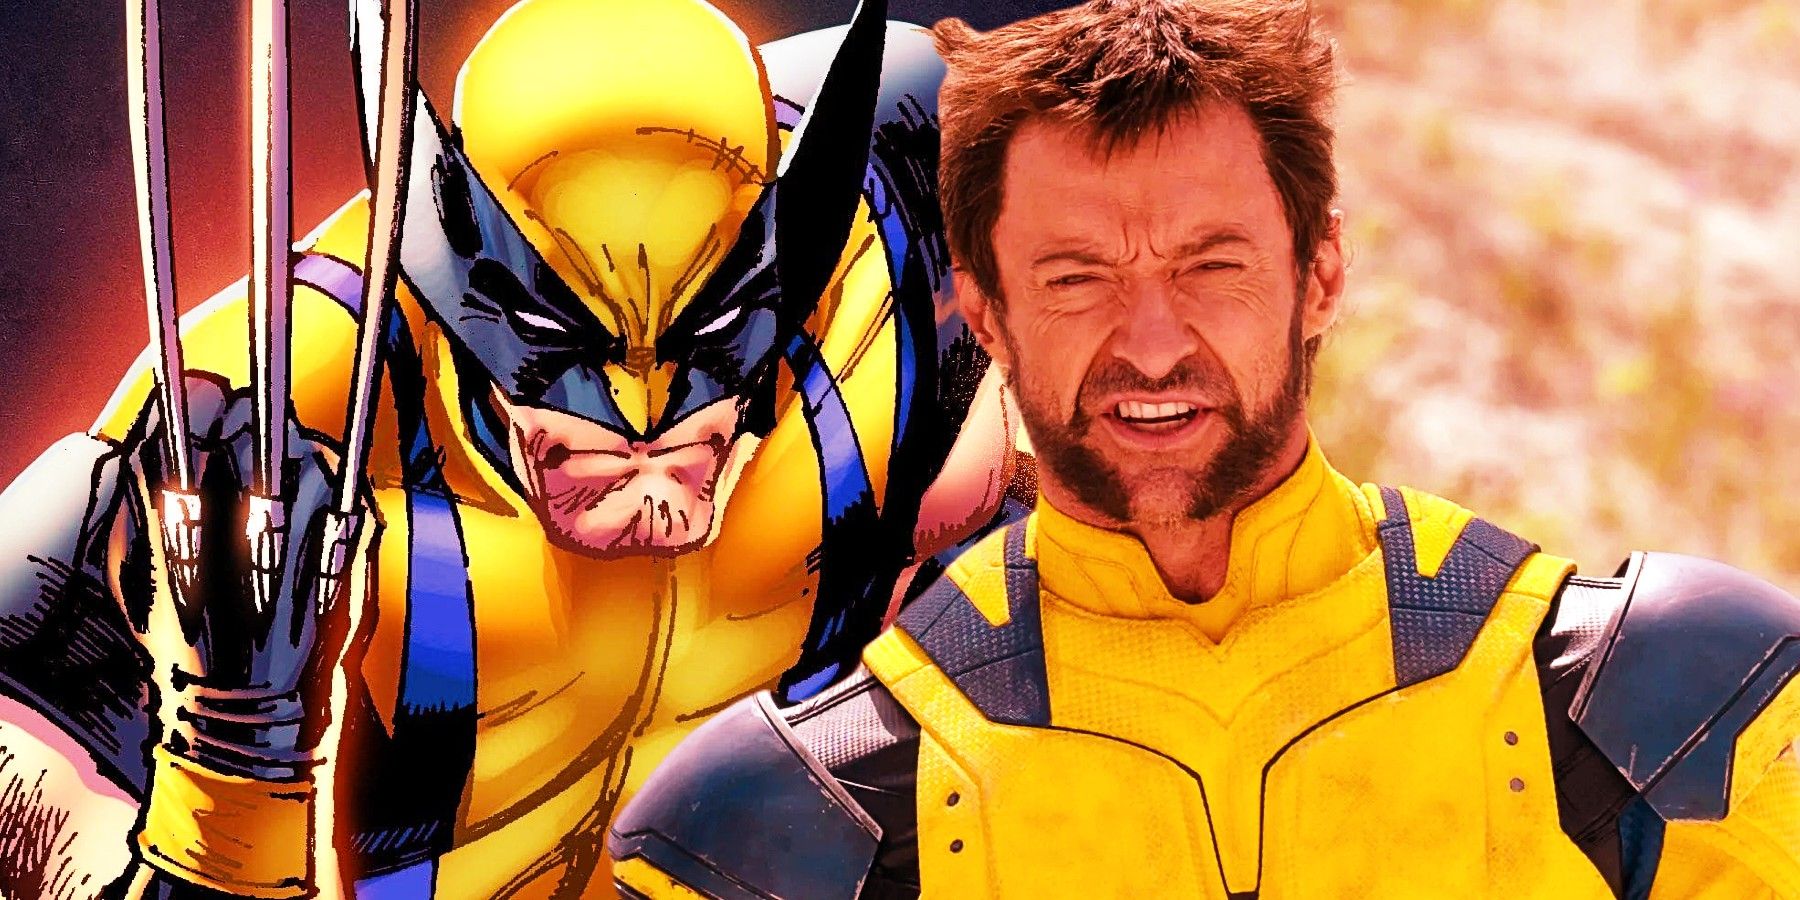 Wolverine In Marvel Comics With Hugh Jackman In Yellow Wolverine Costume From Deadpool & Wolverine